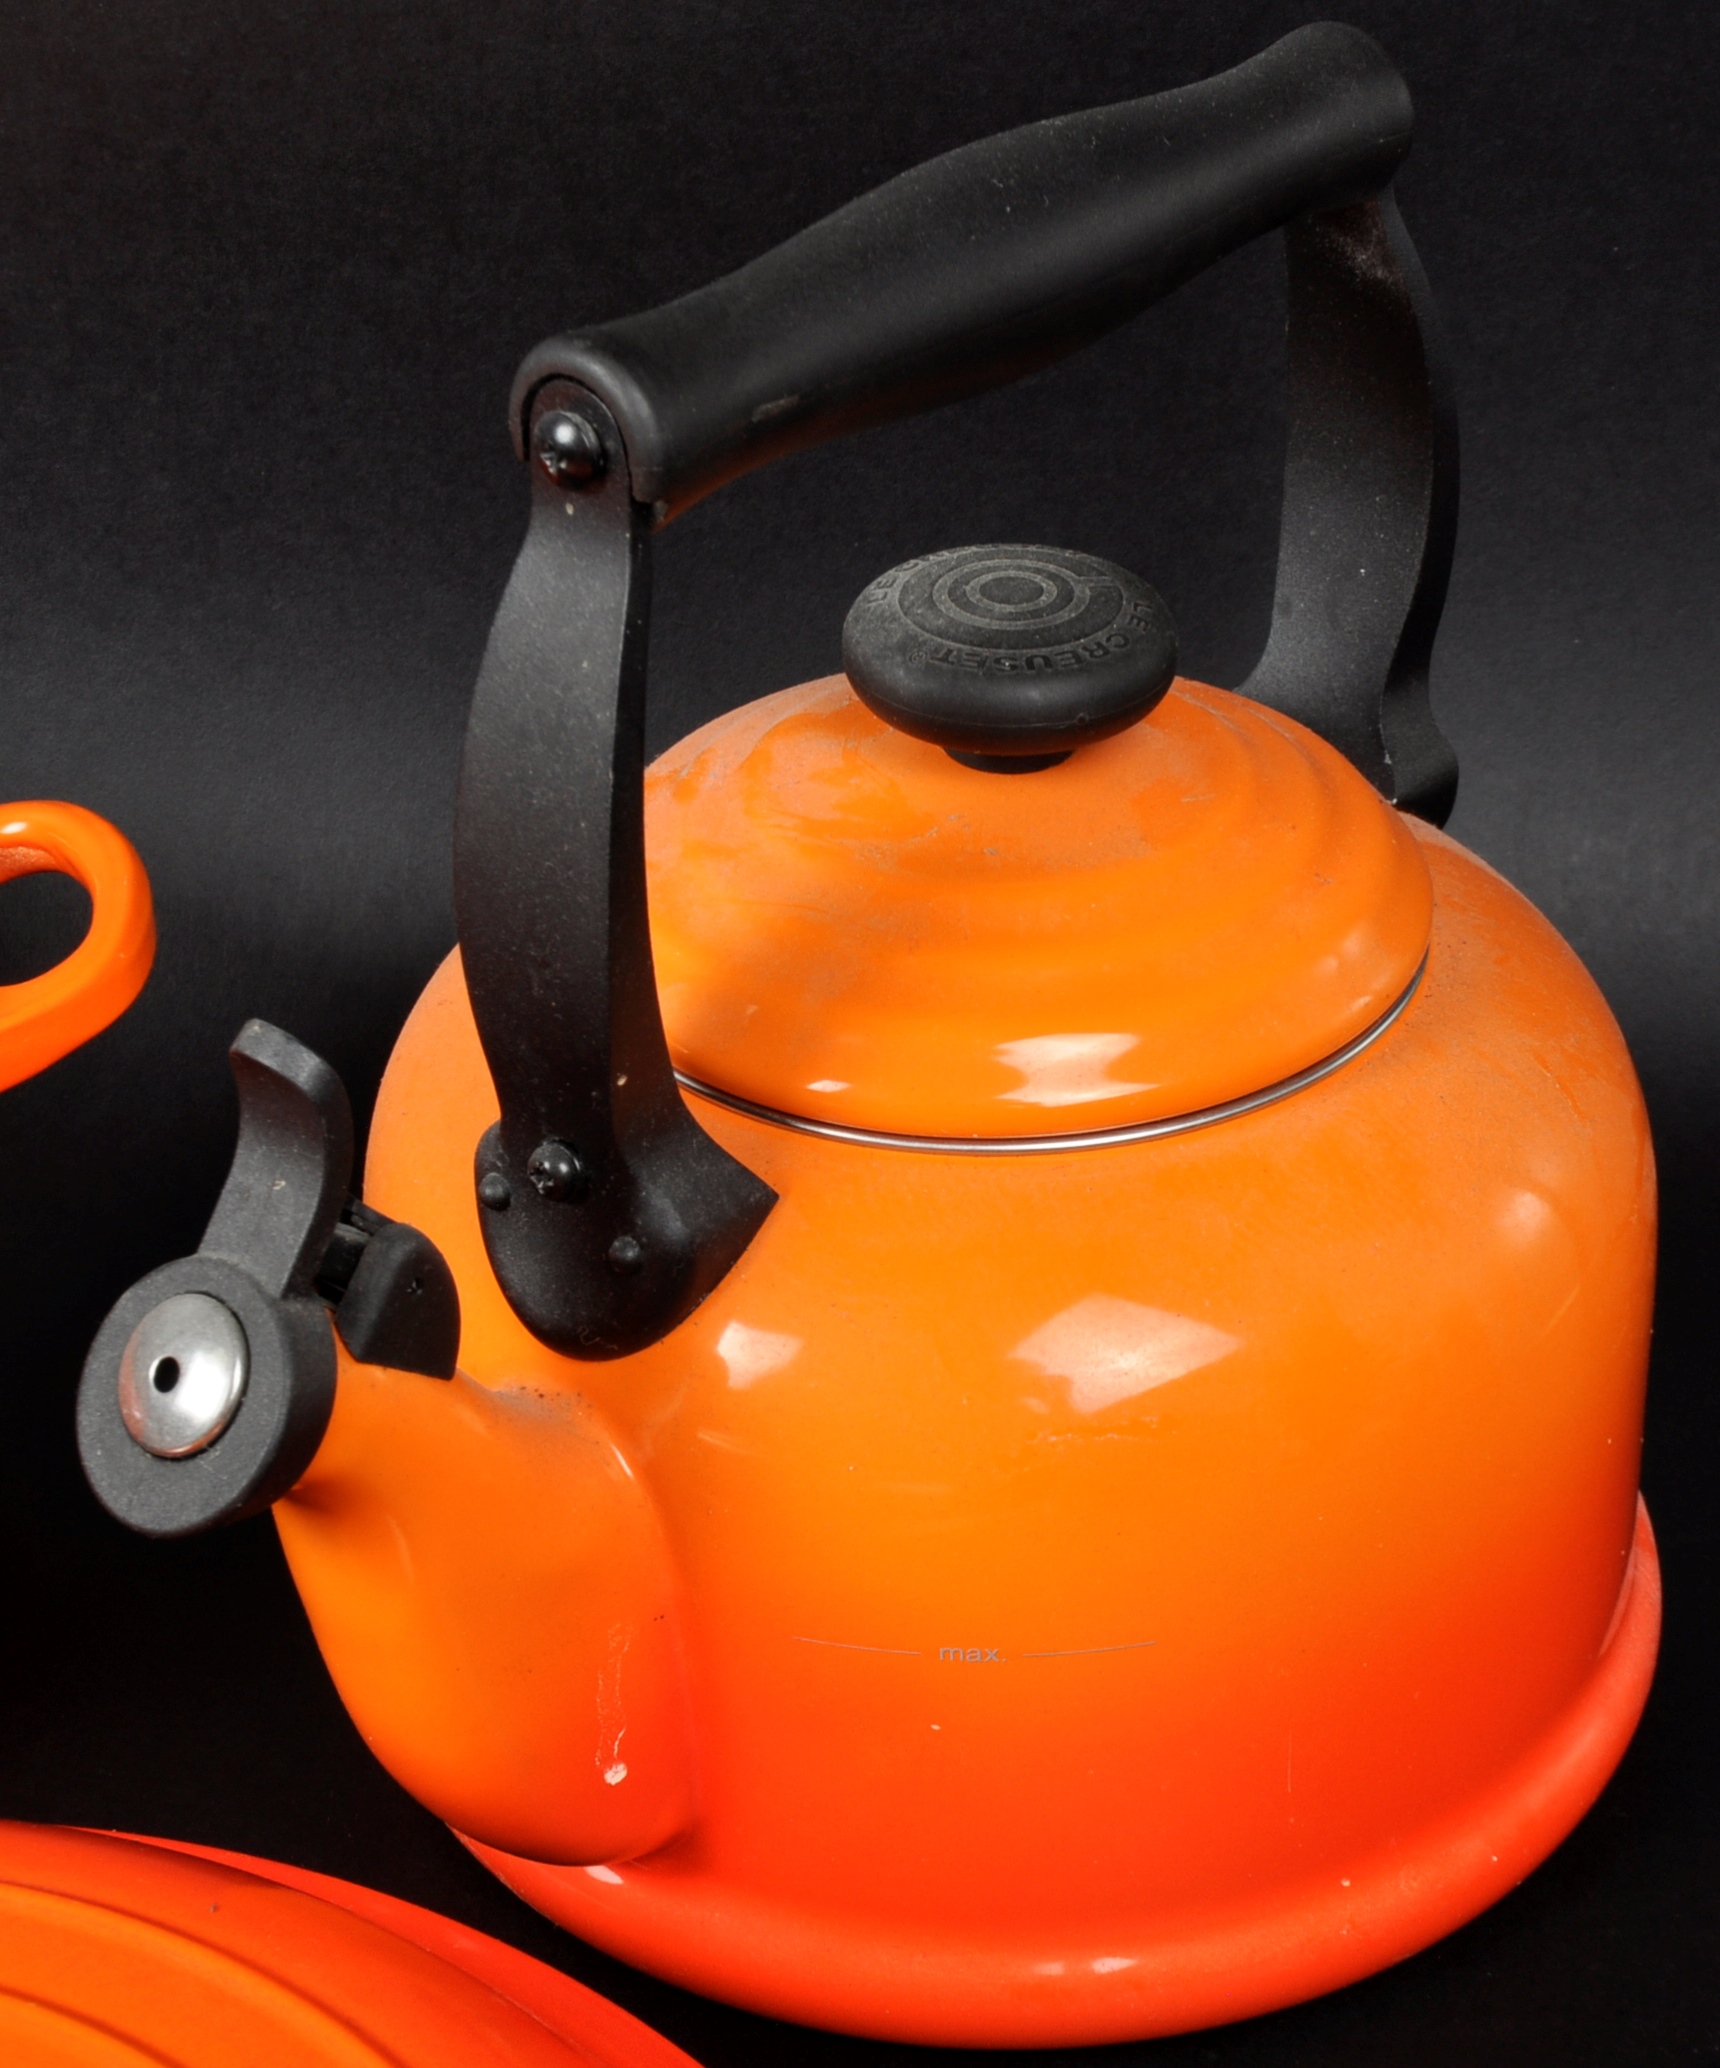 LE CREUSET - SELECTION OF CAST IRON KITCHEN COOKING UTENSILS - Image 5 of 10